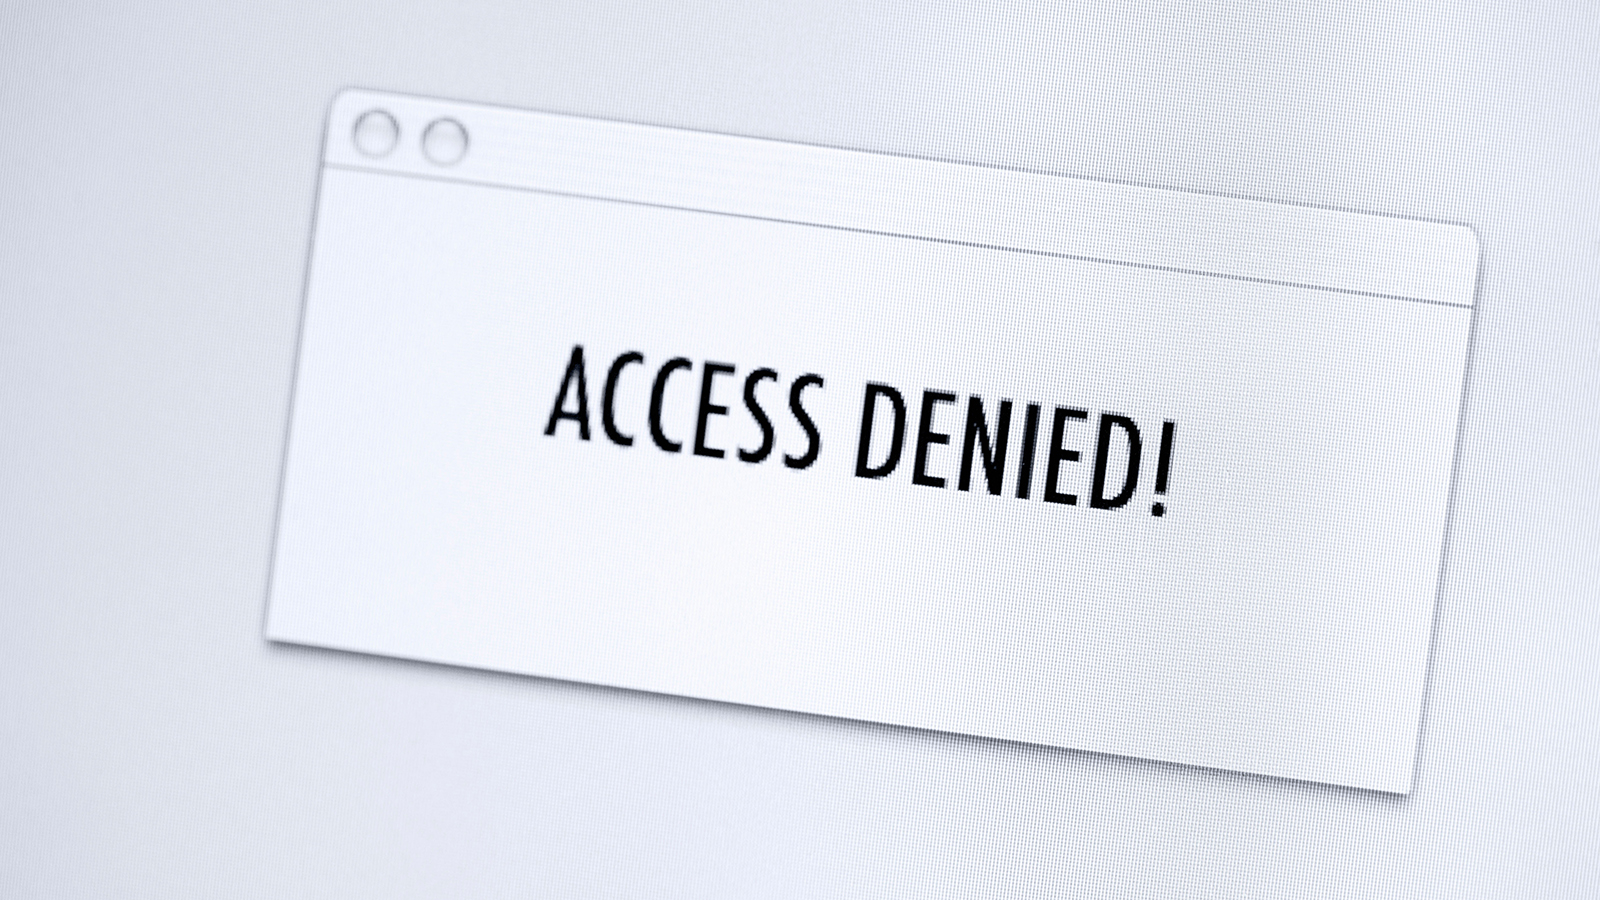 Access to the resource is denied. Access denied. Access denied картинки. Access is denied. Access denied Design.